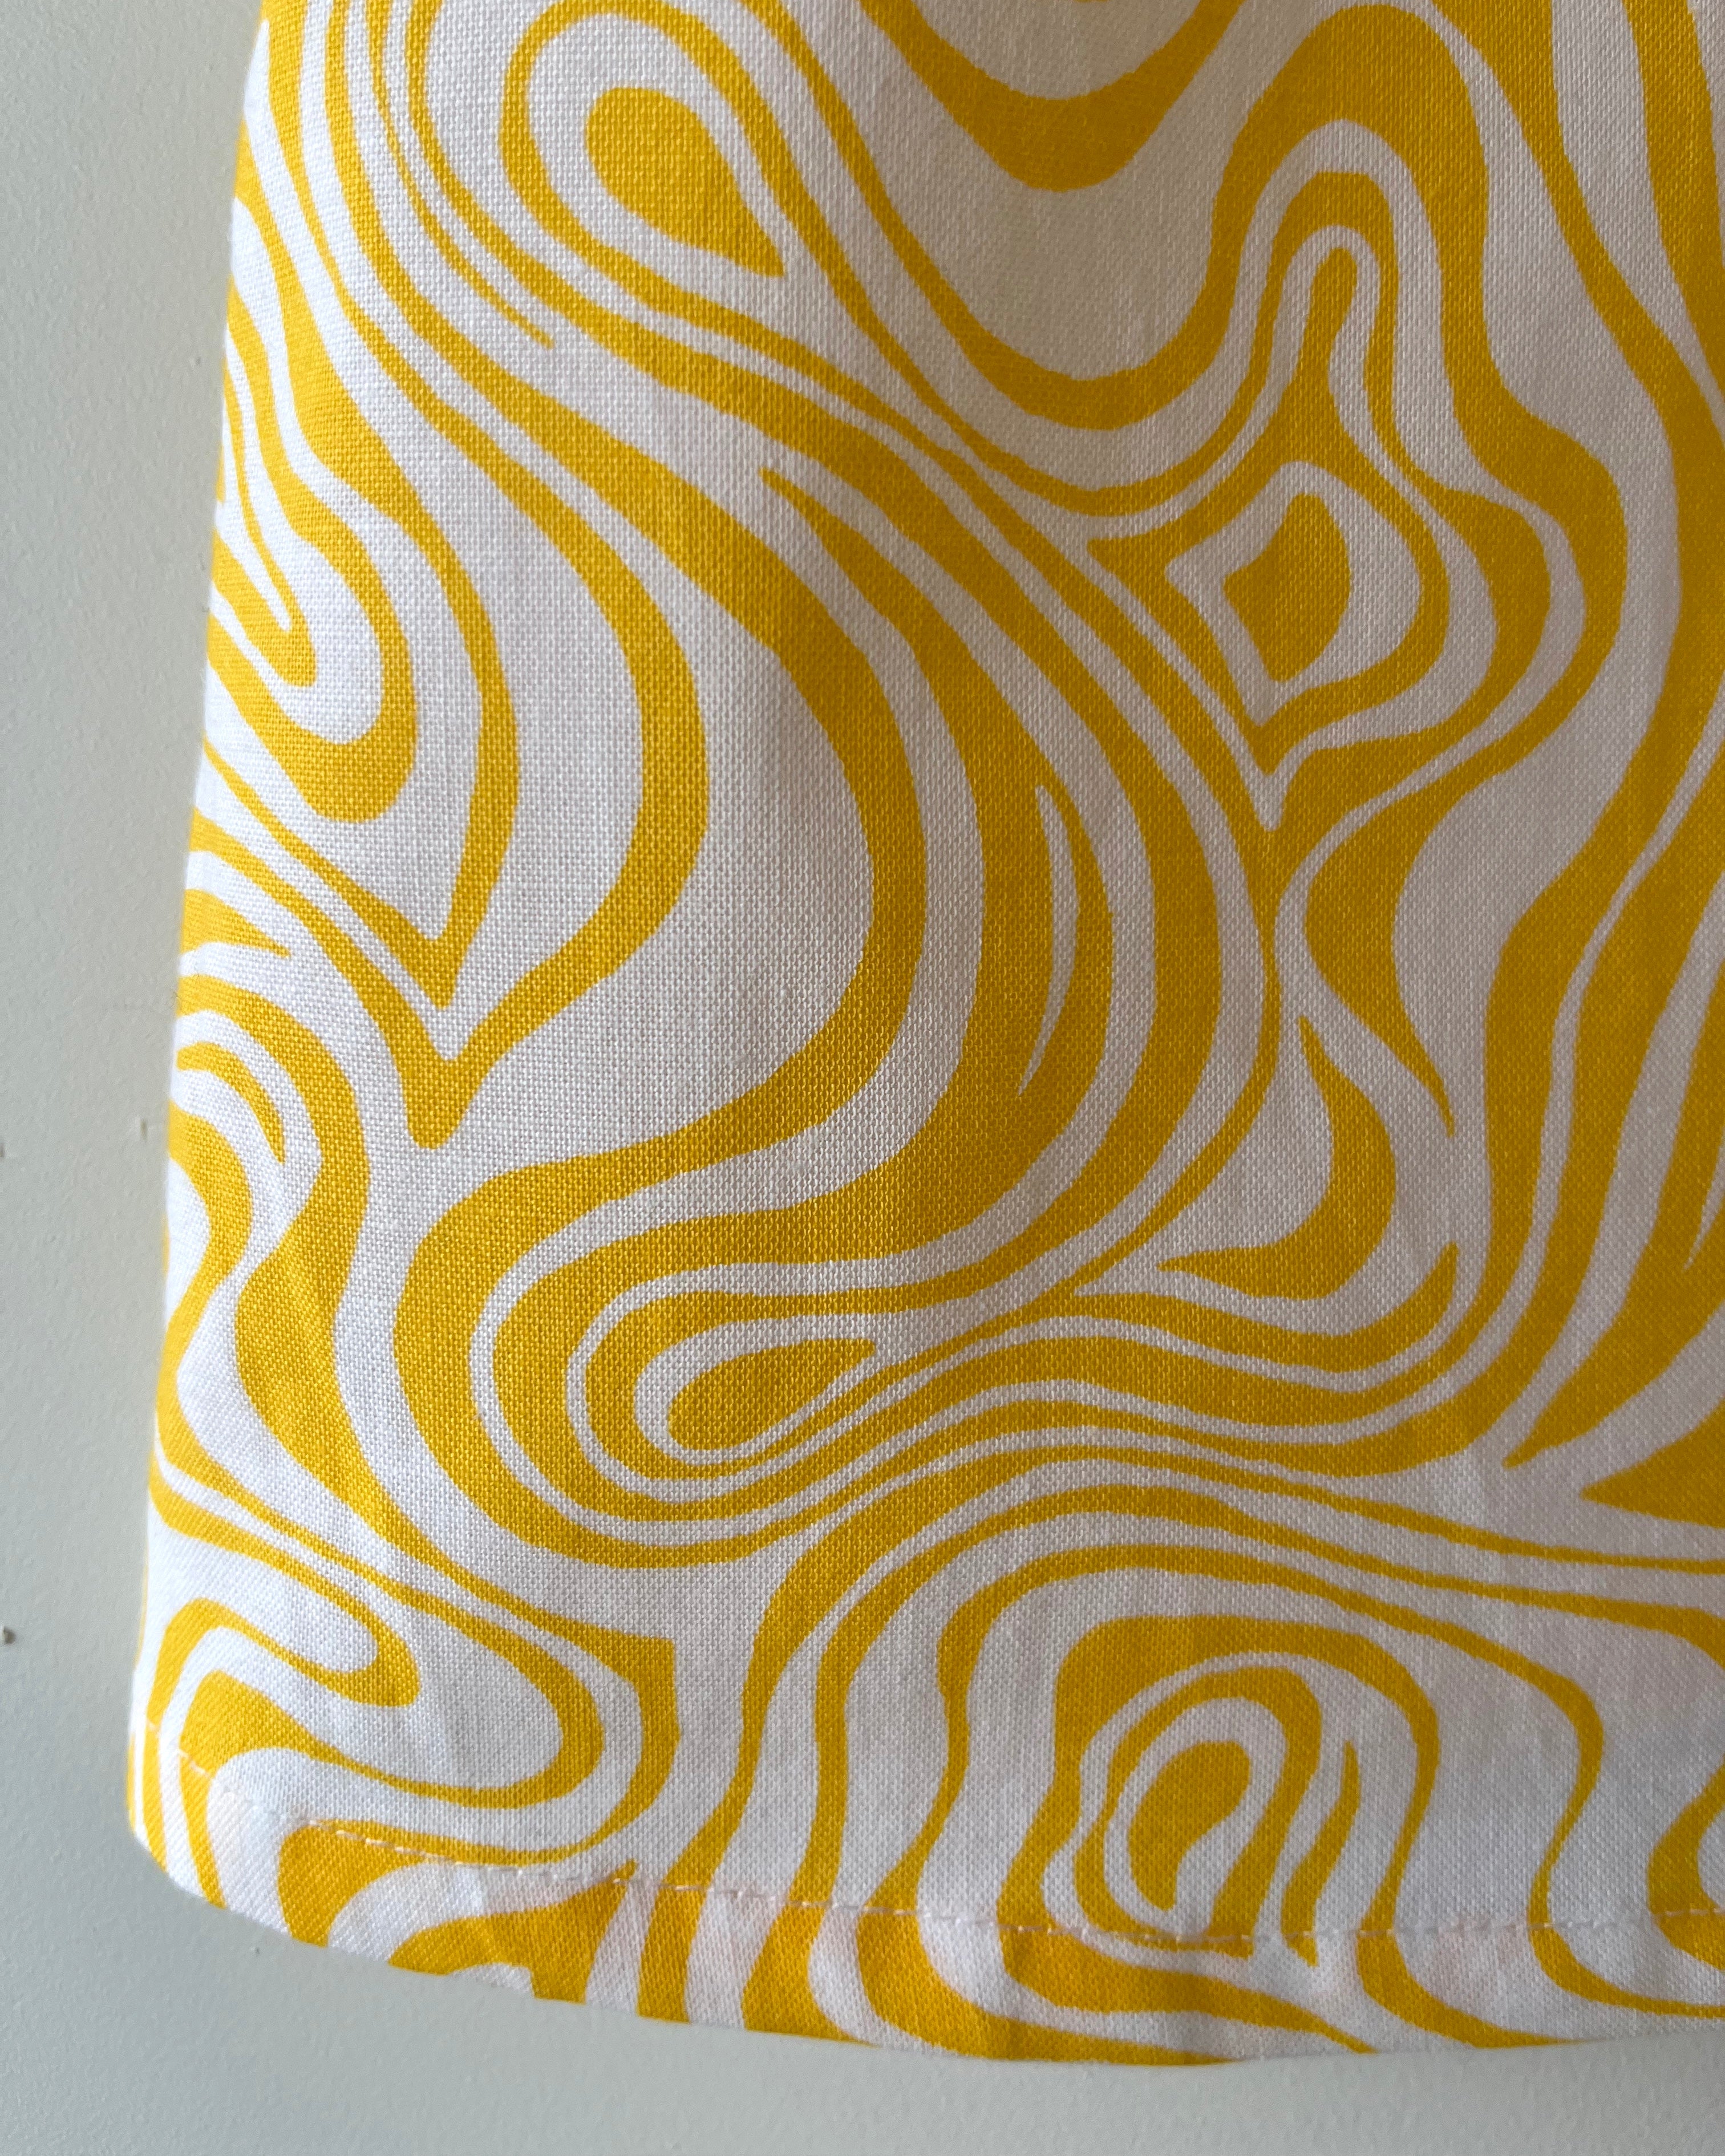 Collage Top Vintage Sunny Swirl L